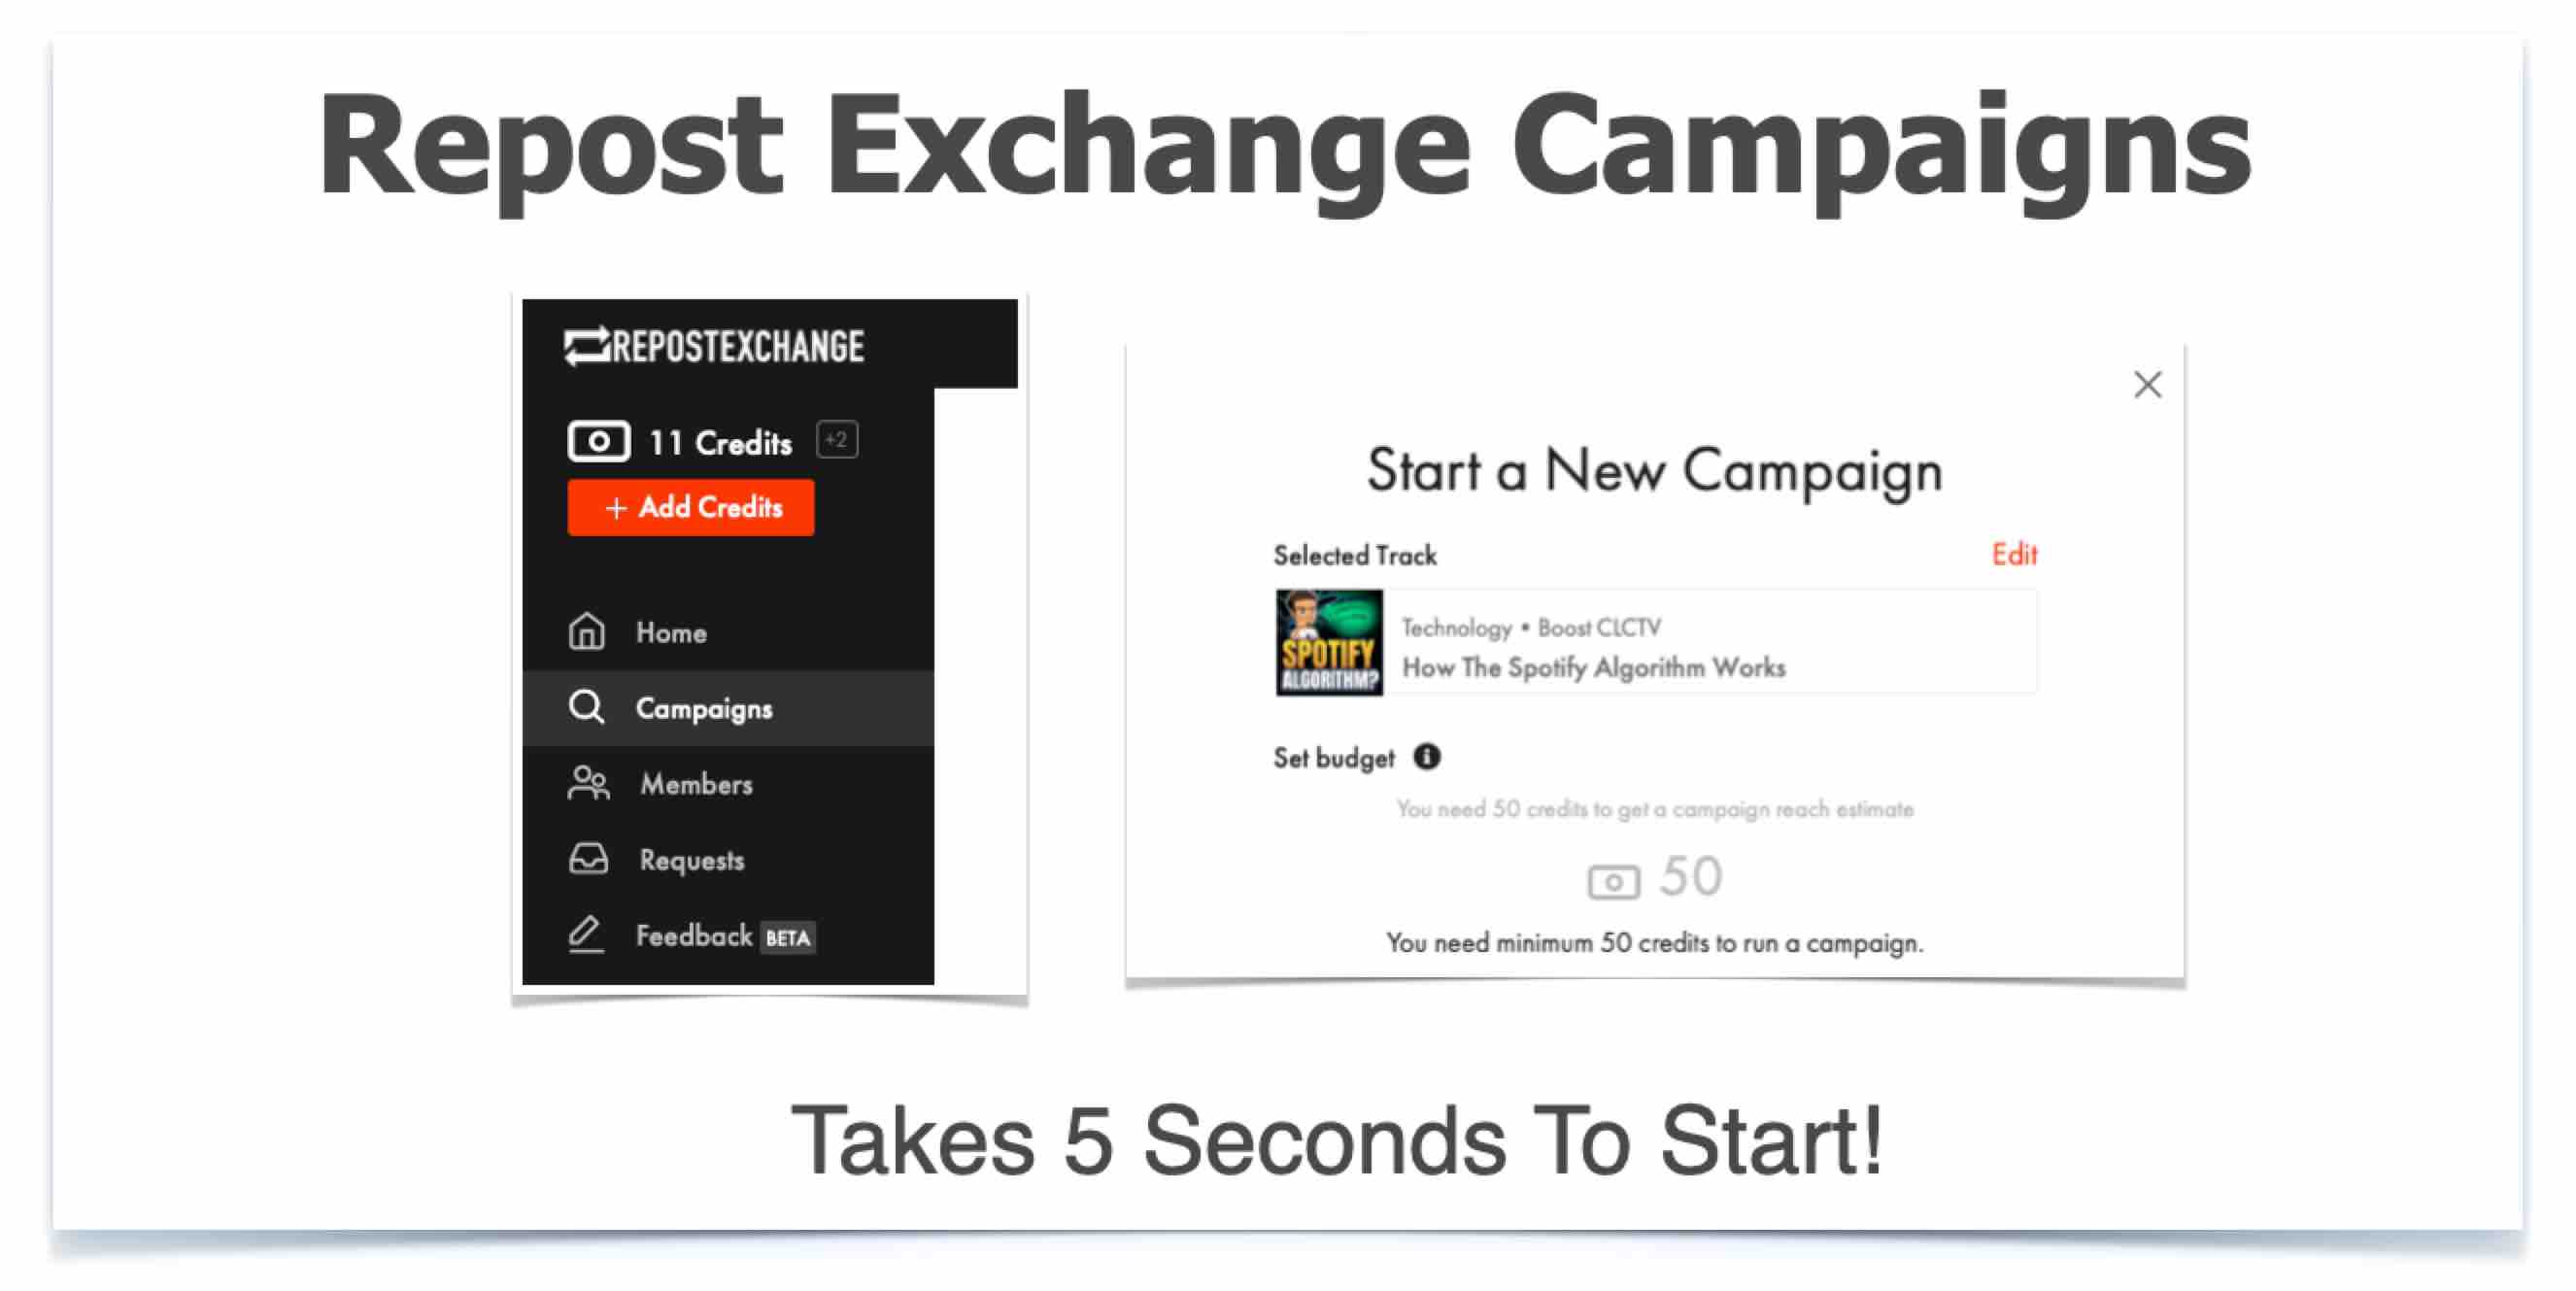 Repost Exchange Campaigns